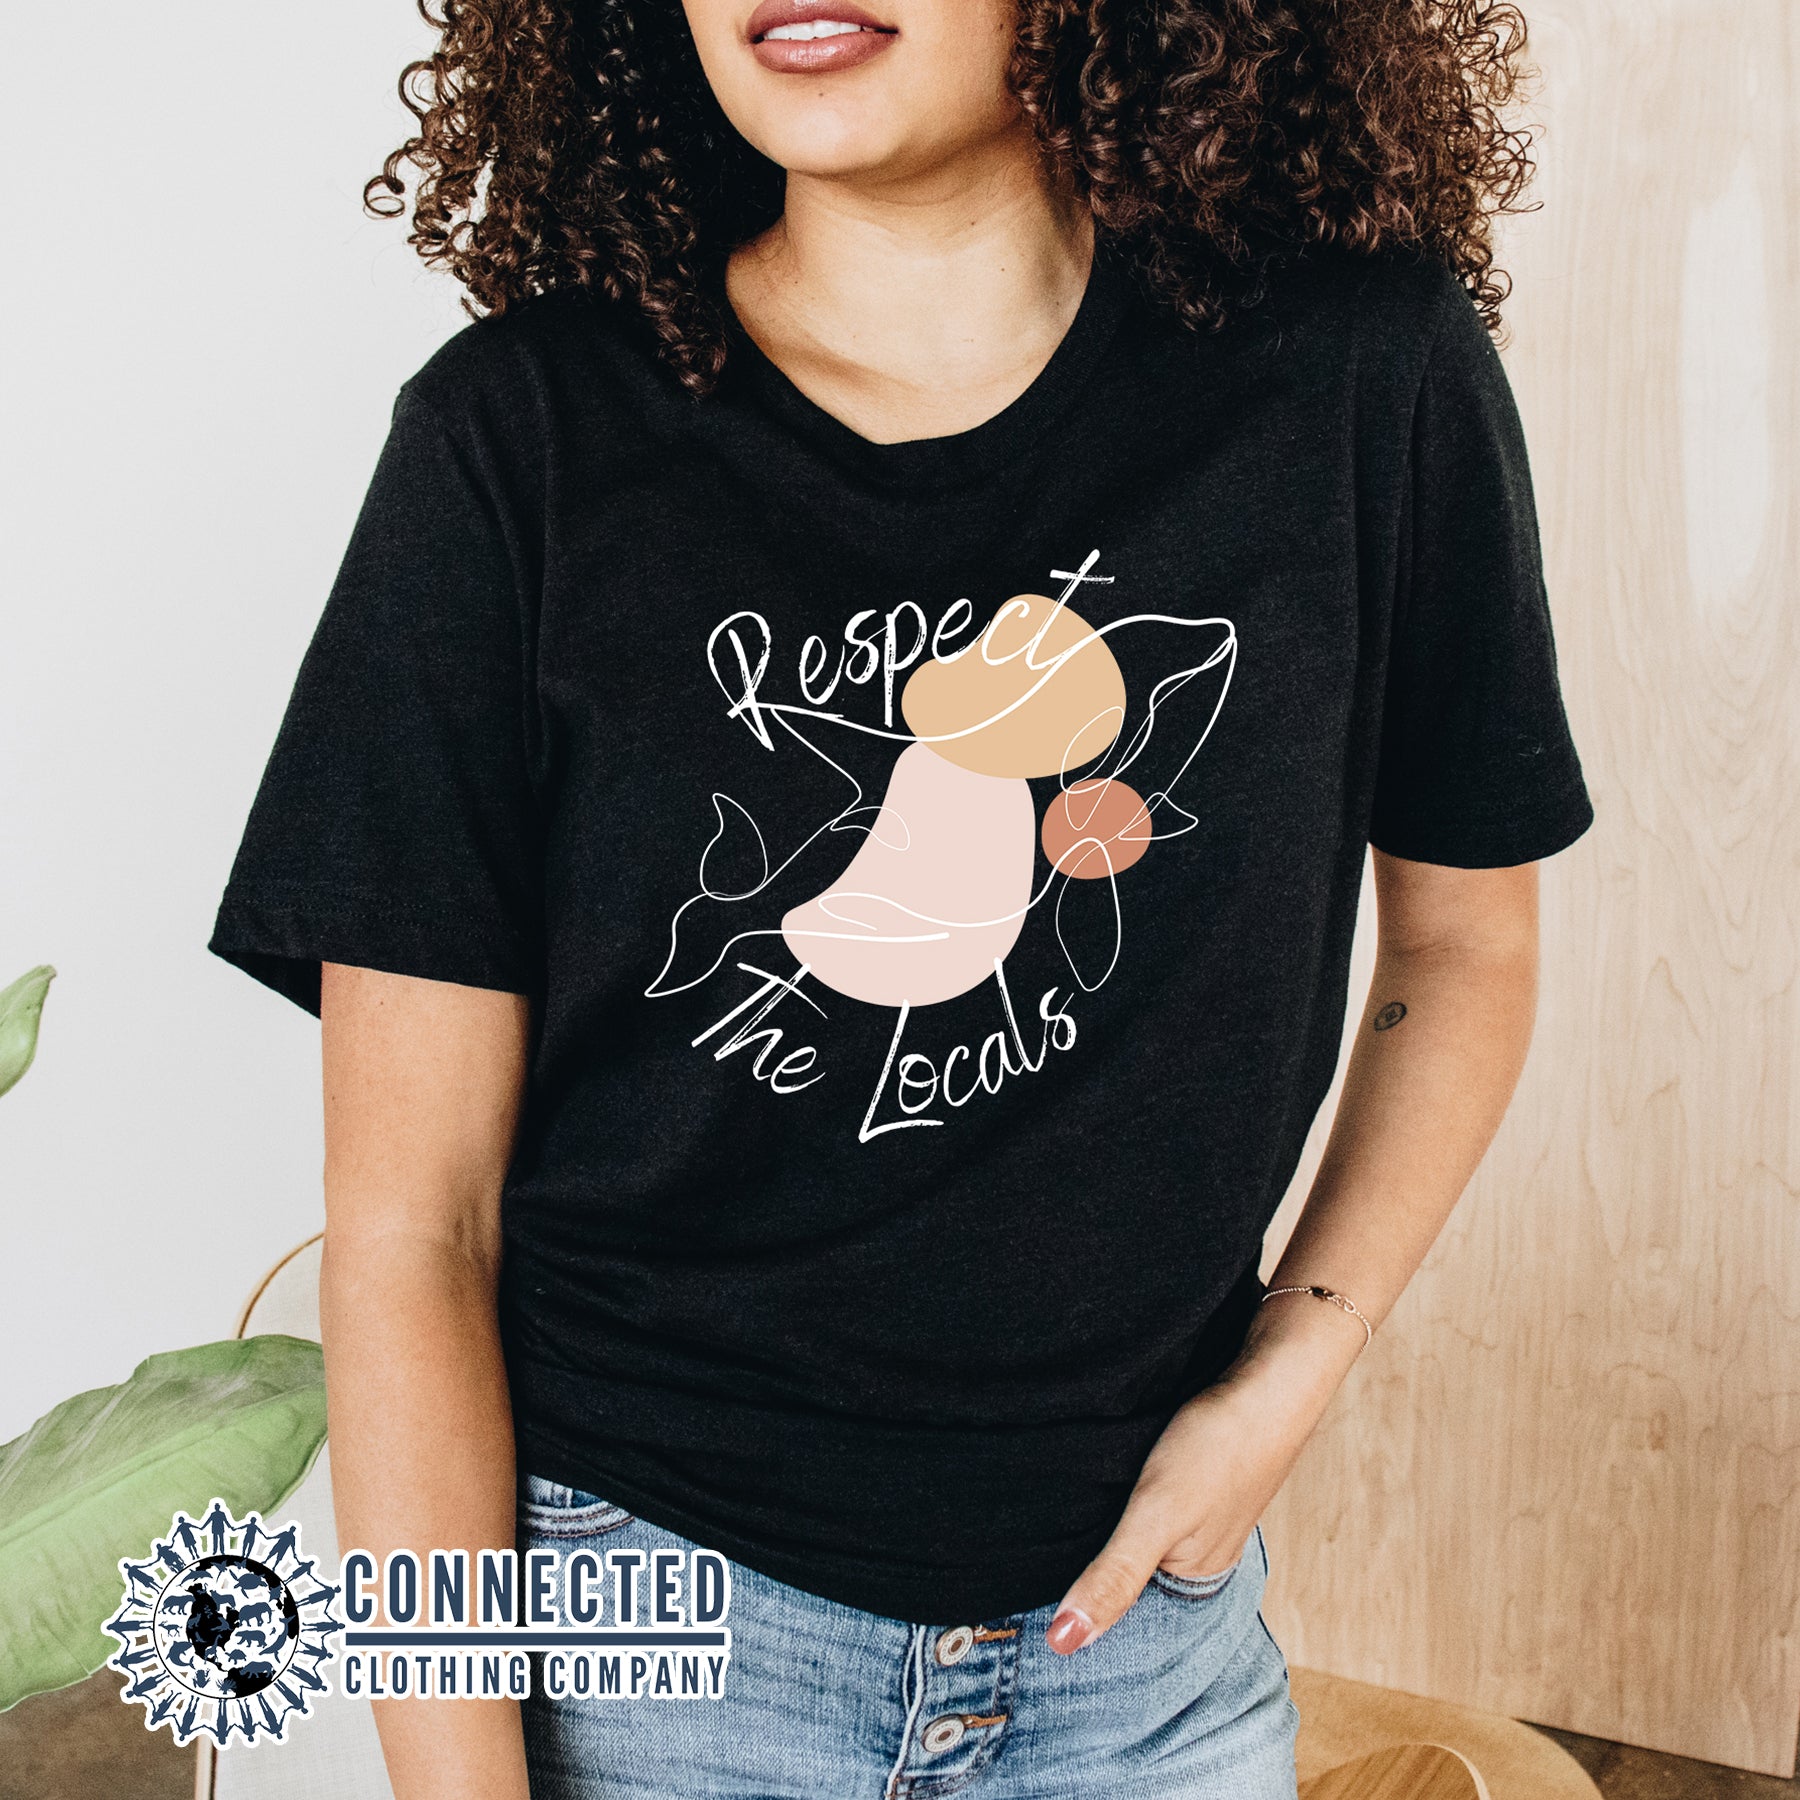  Model Wearing Black Respect The Locals Orca Unisex Short-Sleeve Tee - Connected Clothing Company - Ethically and Sustainably Made - 10% of profits donated to orca conservation